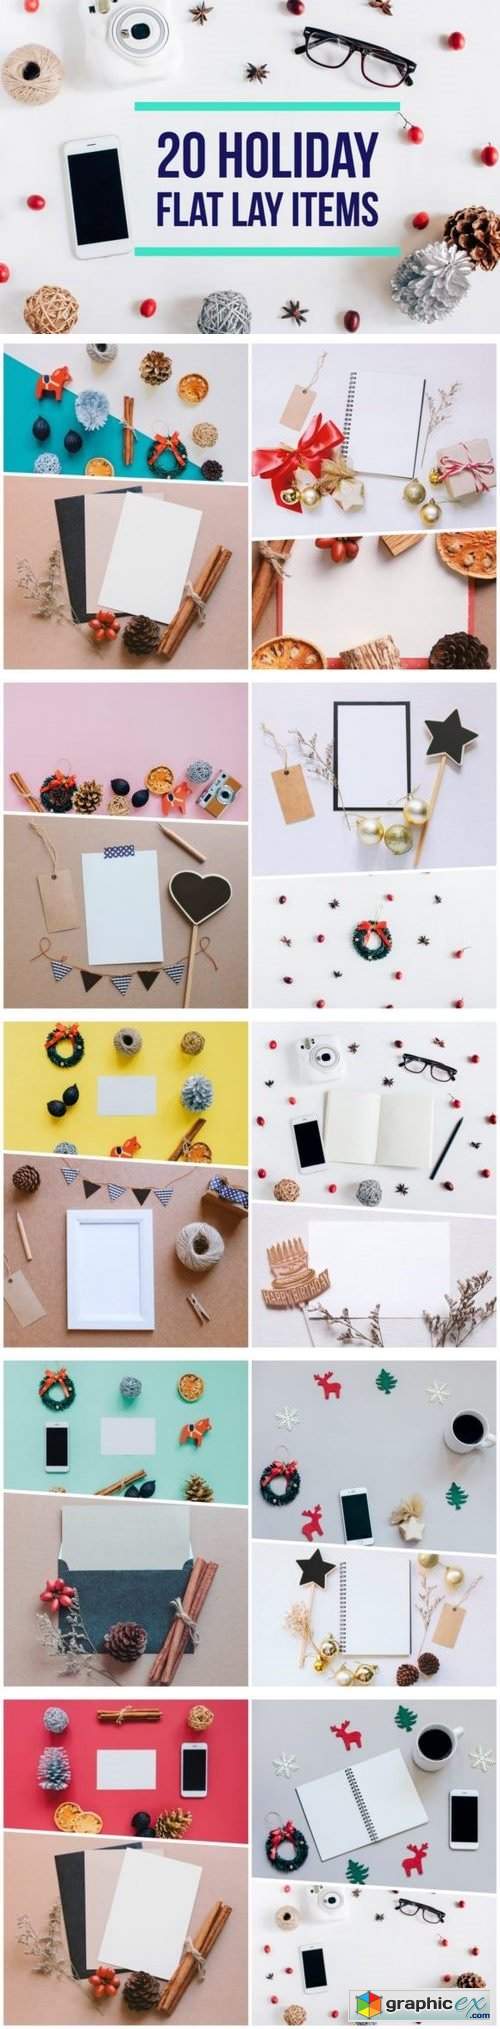 20 Holiday flat lay items collection